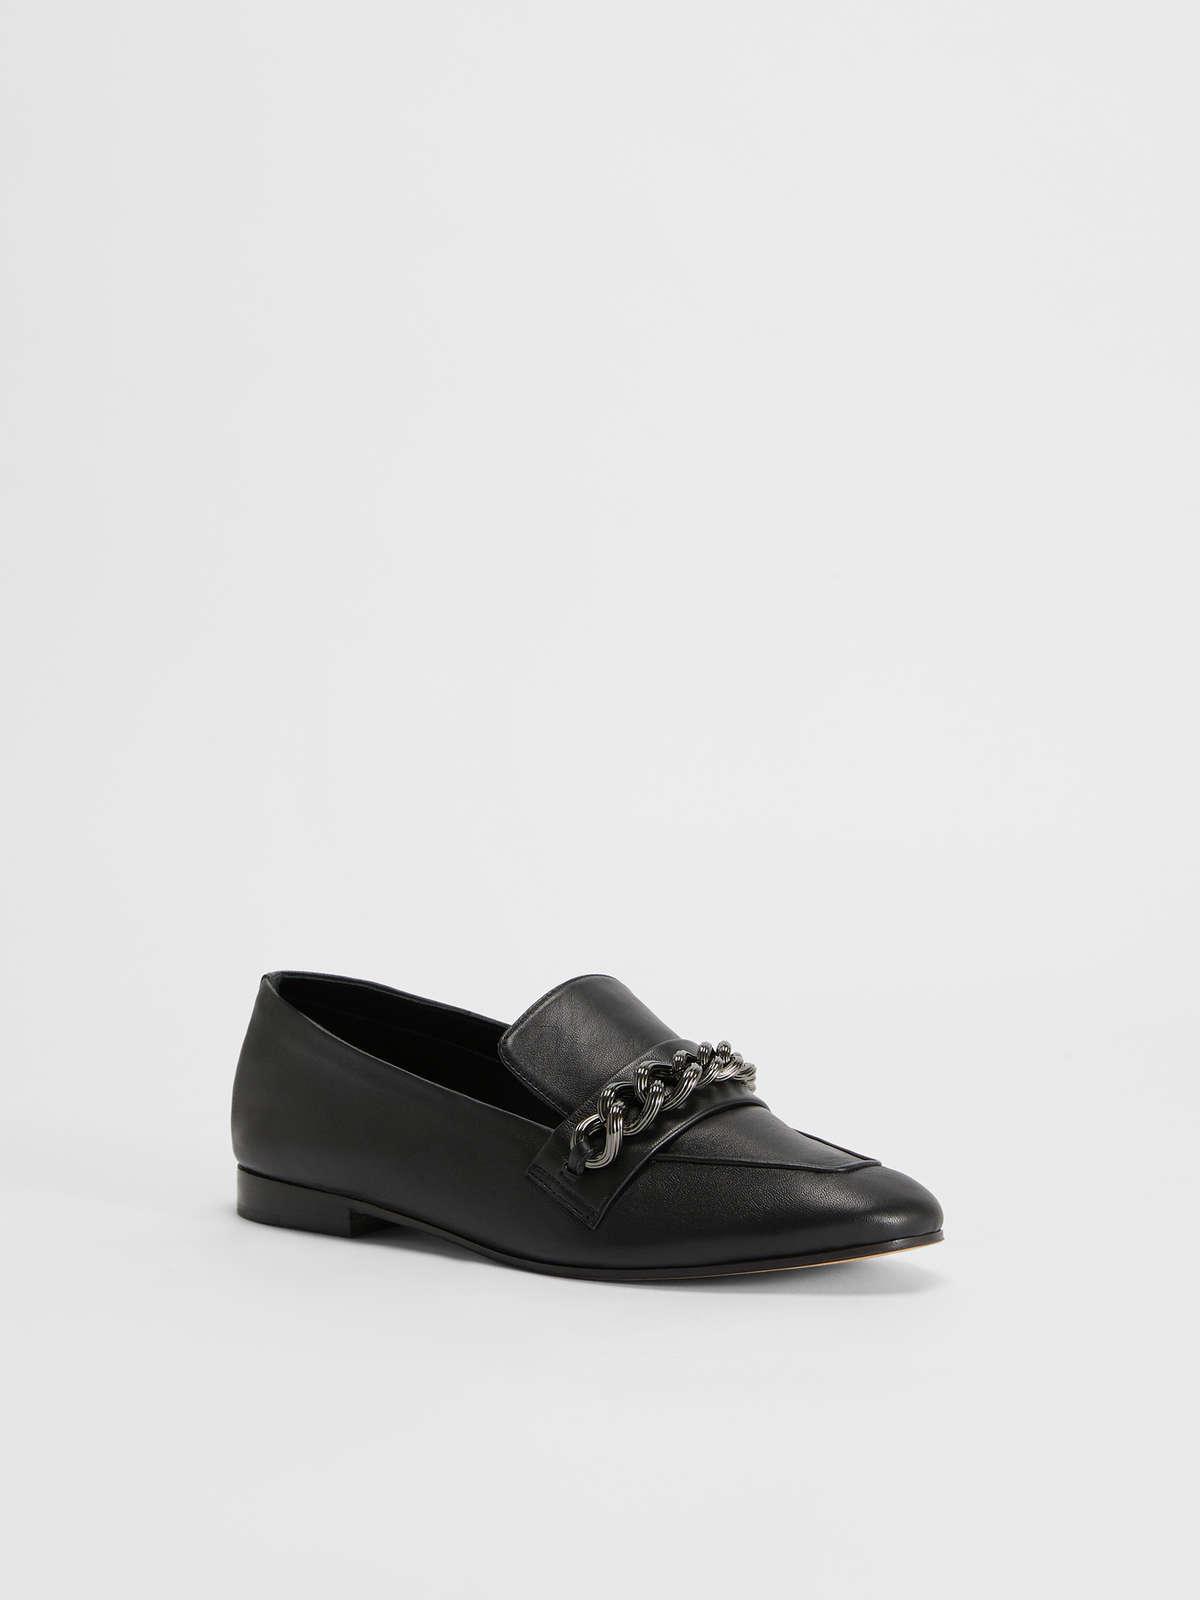 Womens Max Mara Flat Shoes | Nappa Leather Loafers Black